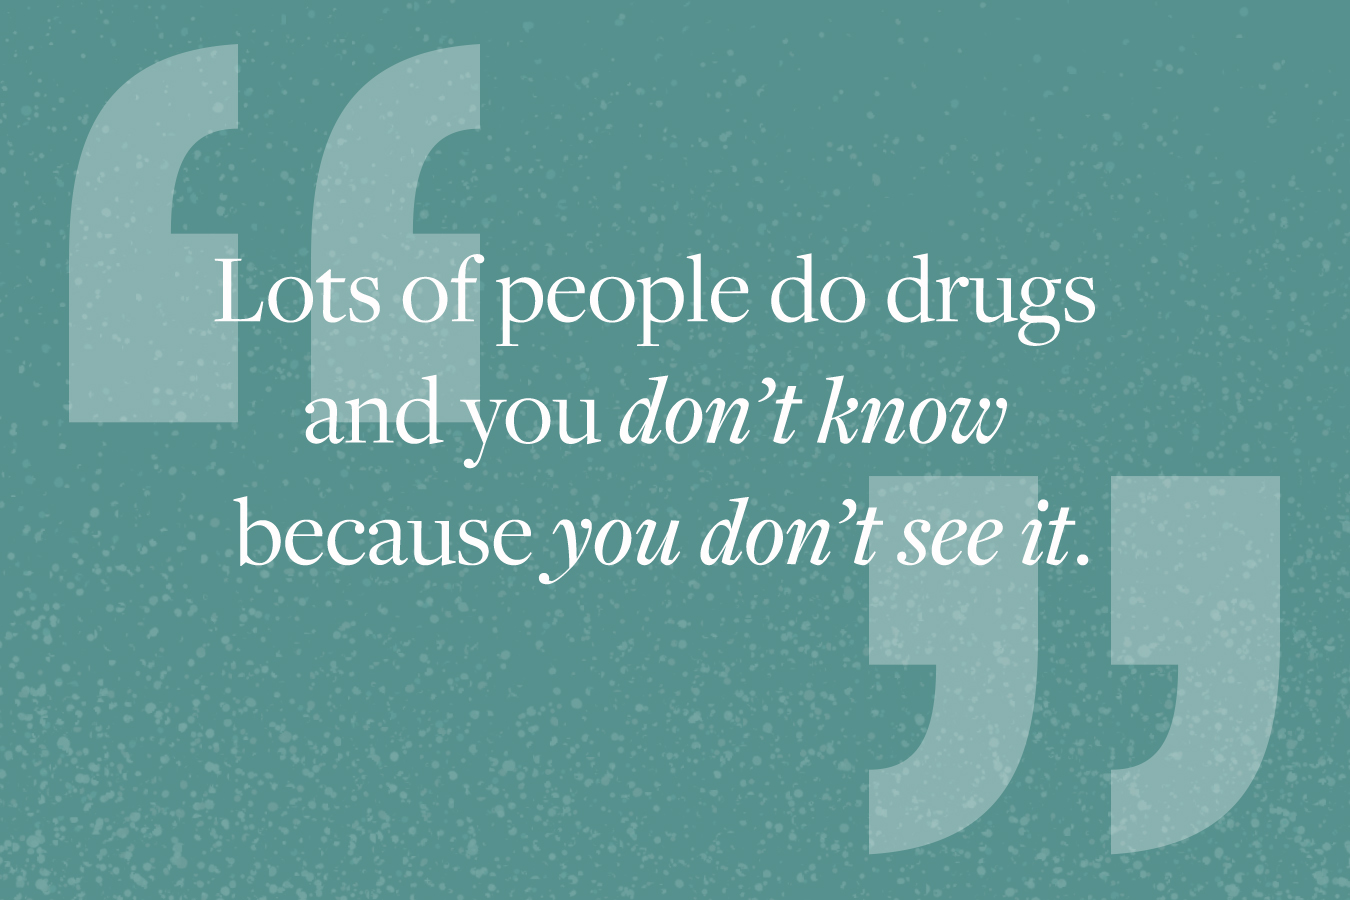 Graphic image of quote from story: "Lots of people do drugs and you don't know because you don't see it."